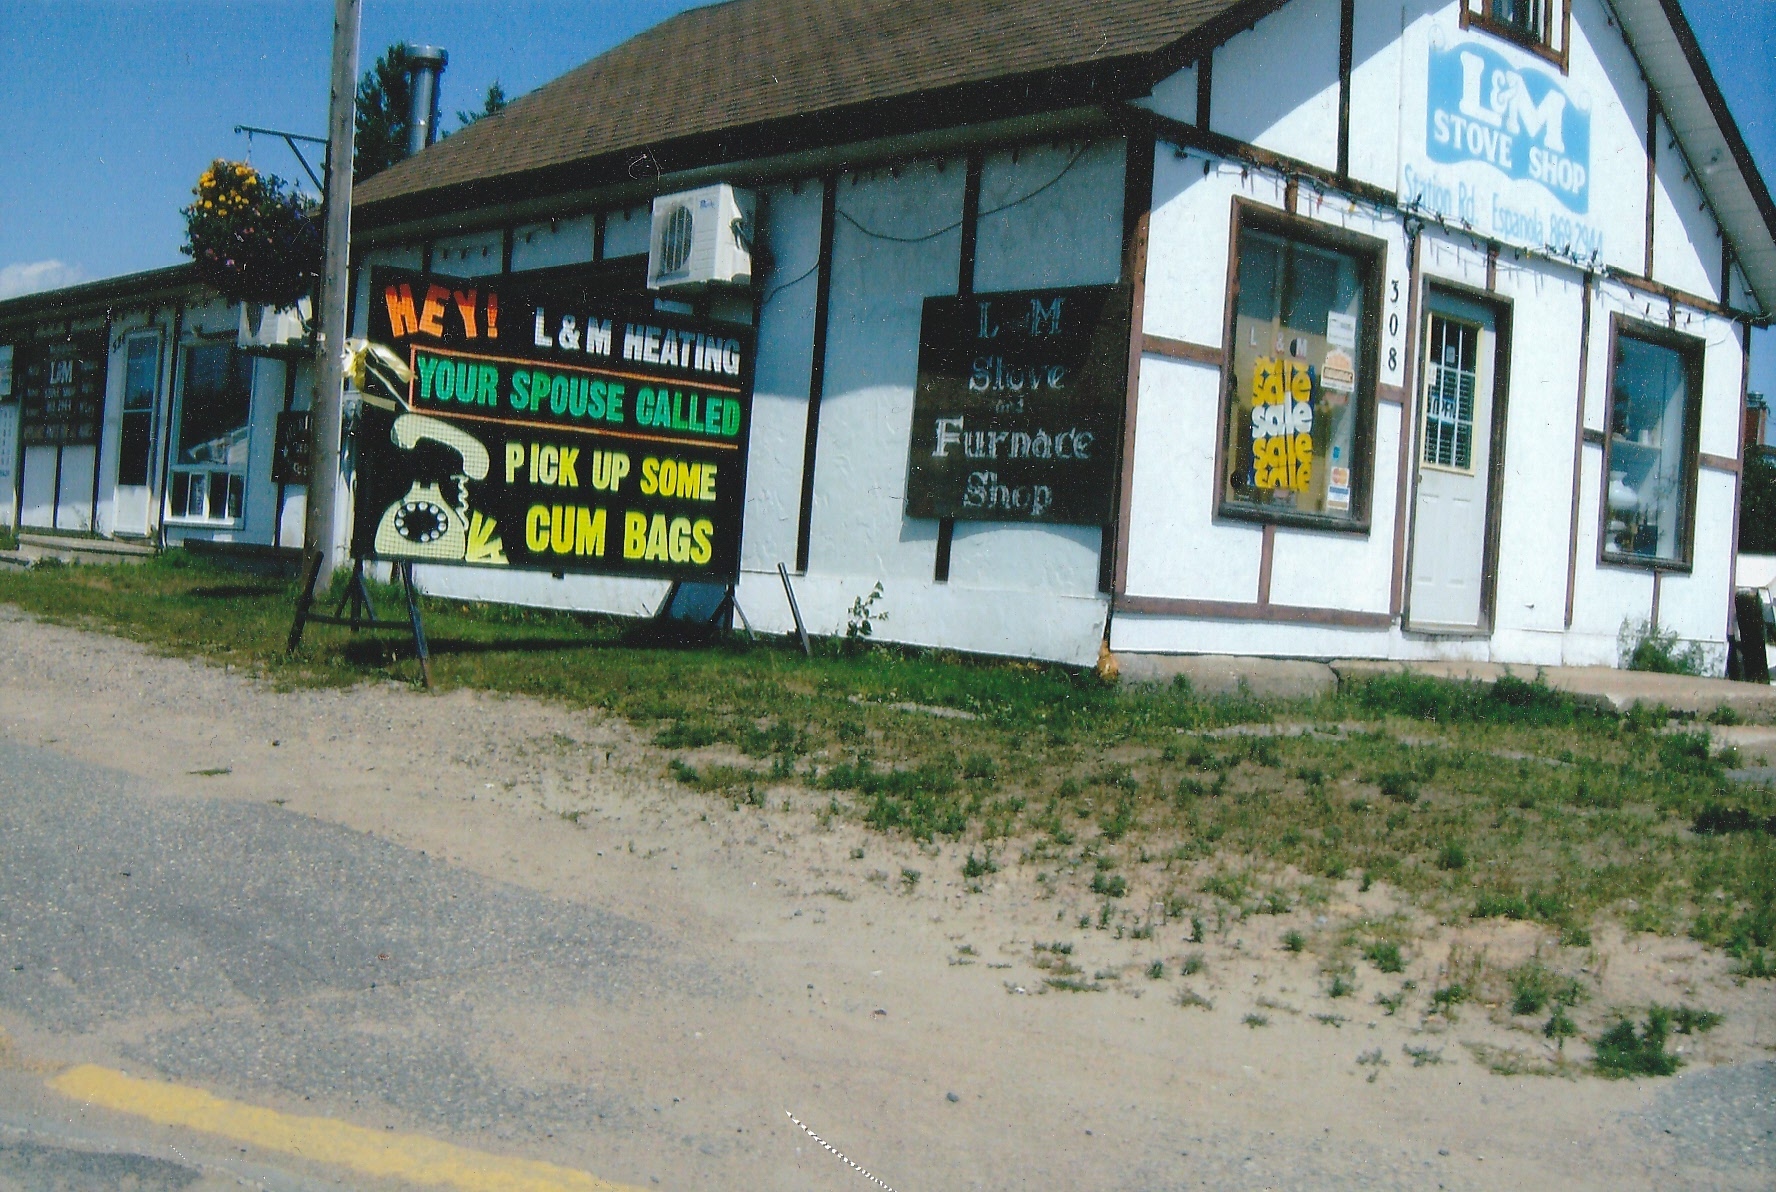 This sign is from a vacumm shop in Espanola Ont.